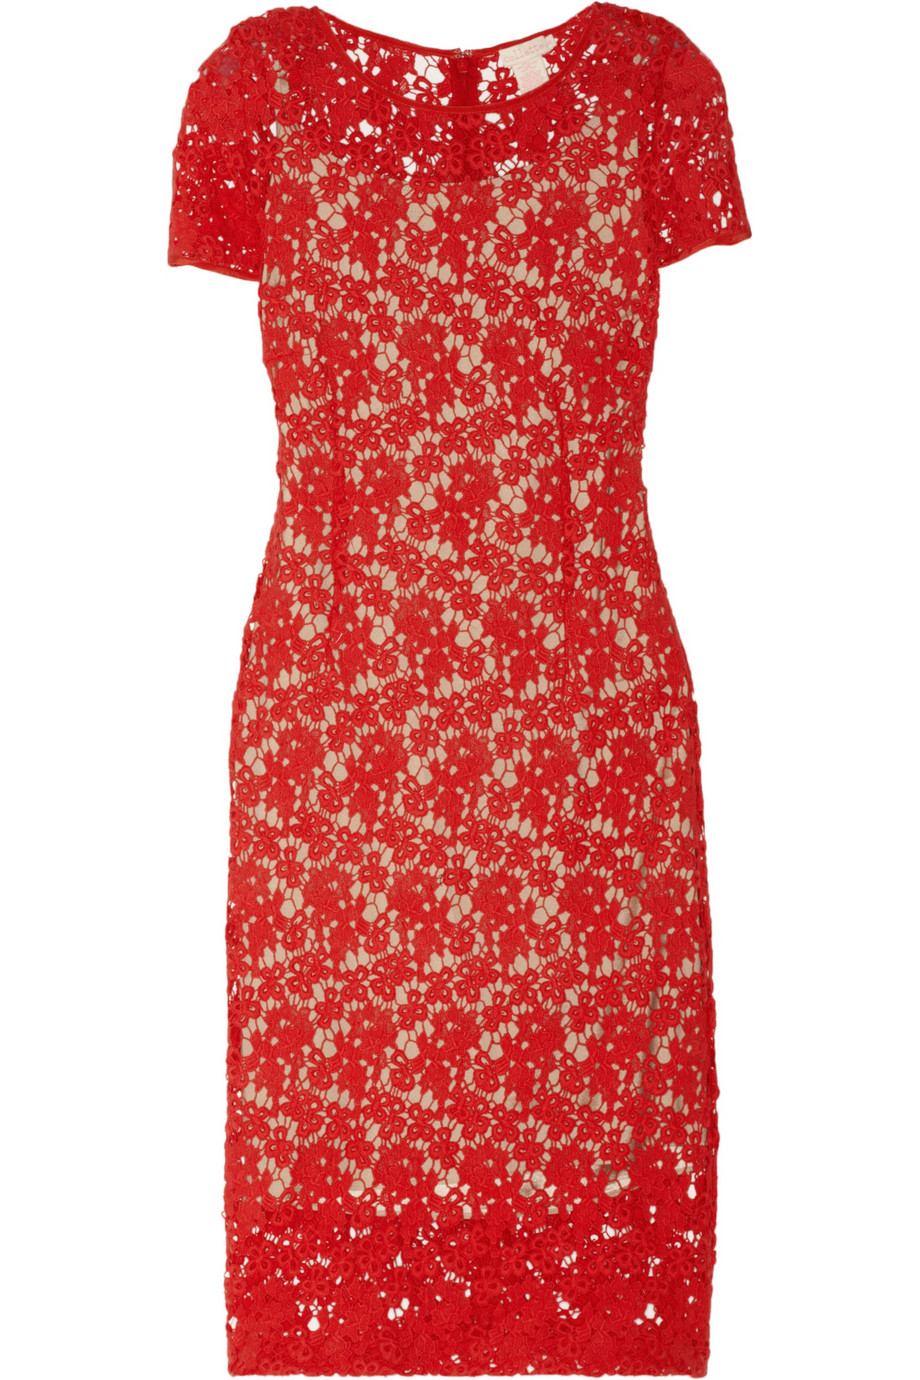 Collette by collette dinnigan Cottonlace Dress in Red | Lyst